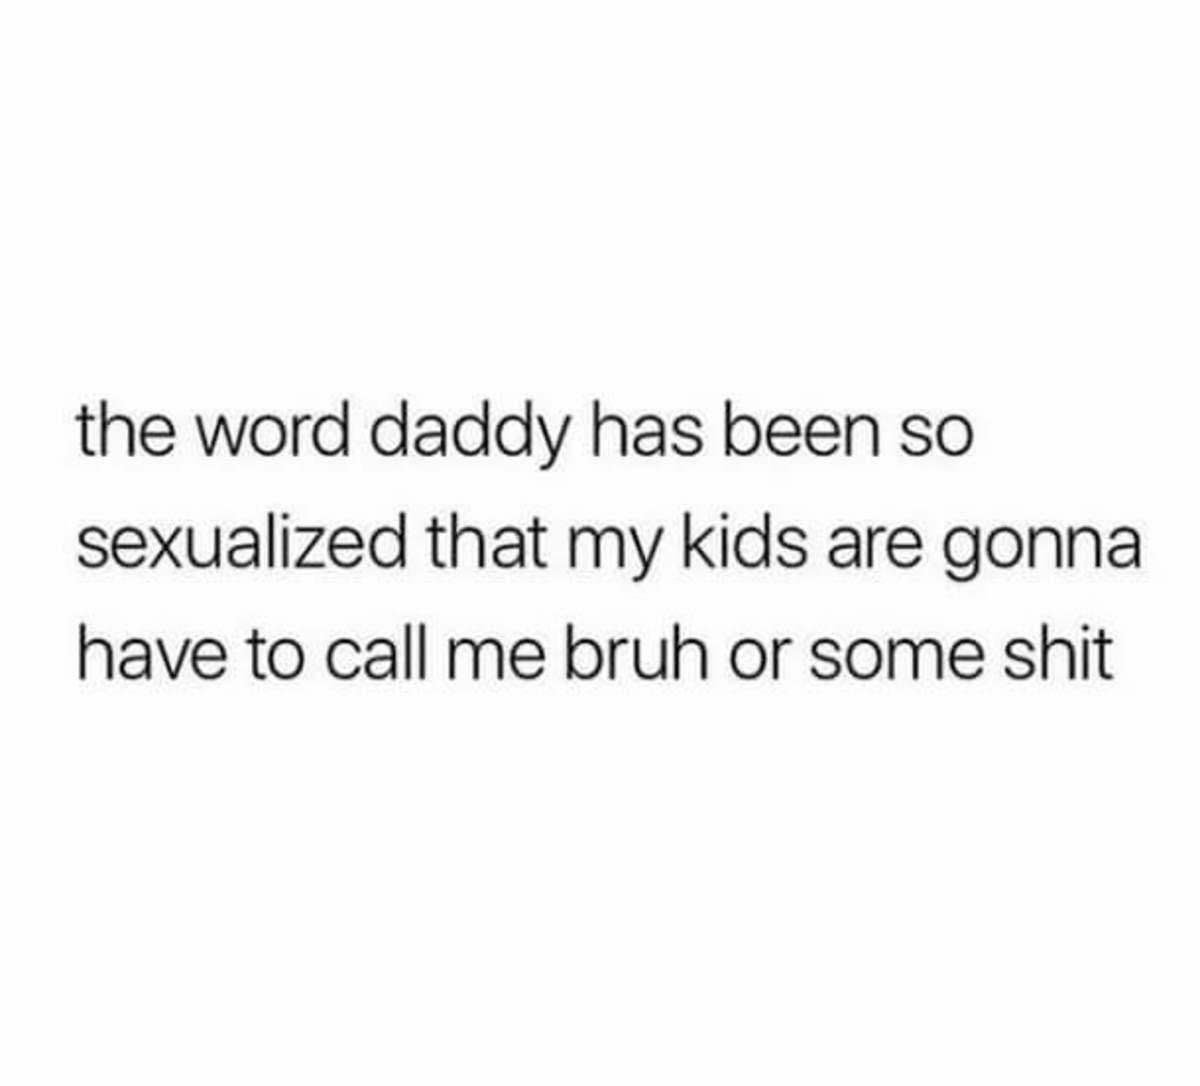 my kids can t call me daddy - the word daddy has been so sexualized that my kids are gonna have to call me bruh or some shit